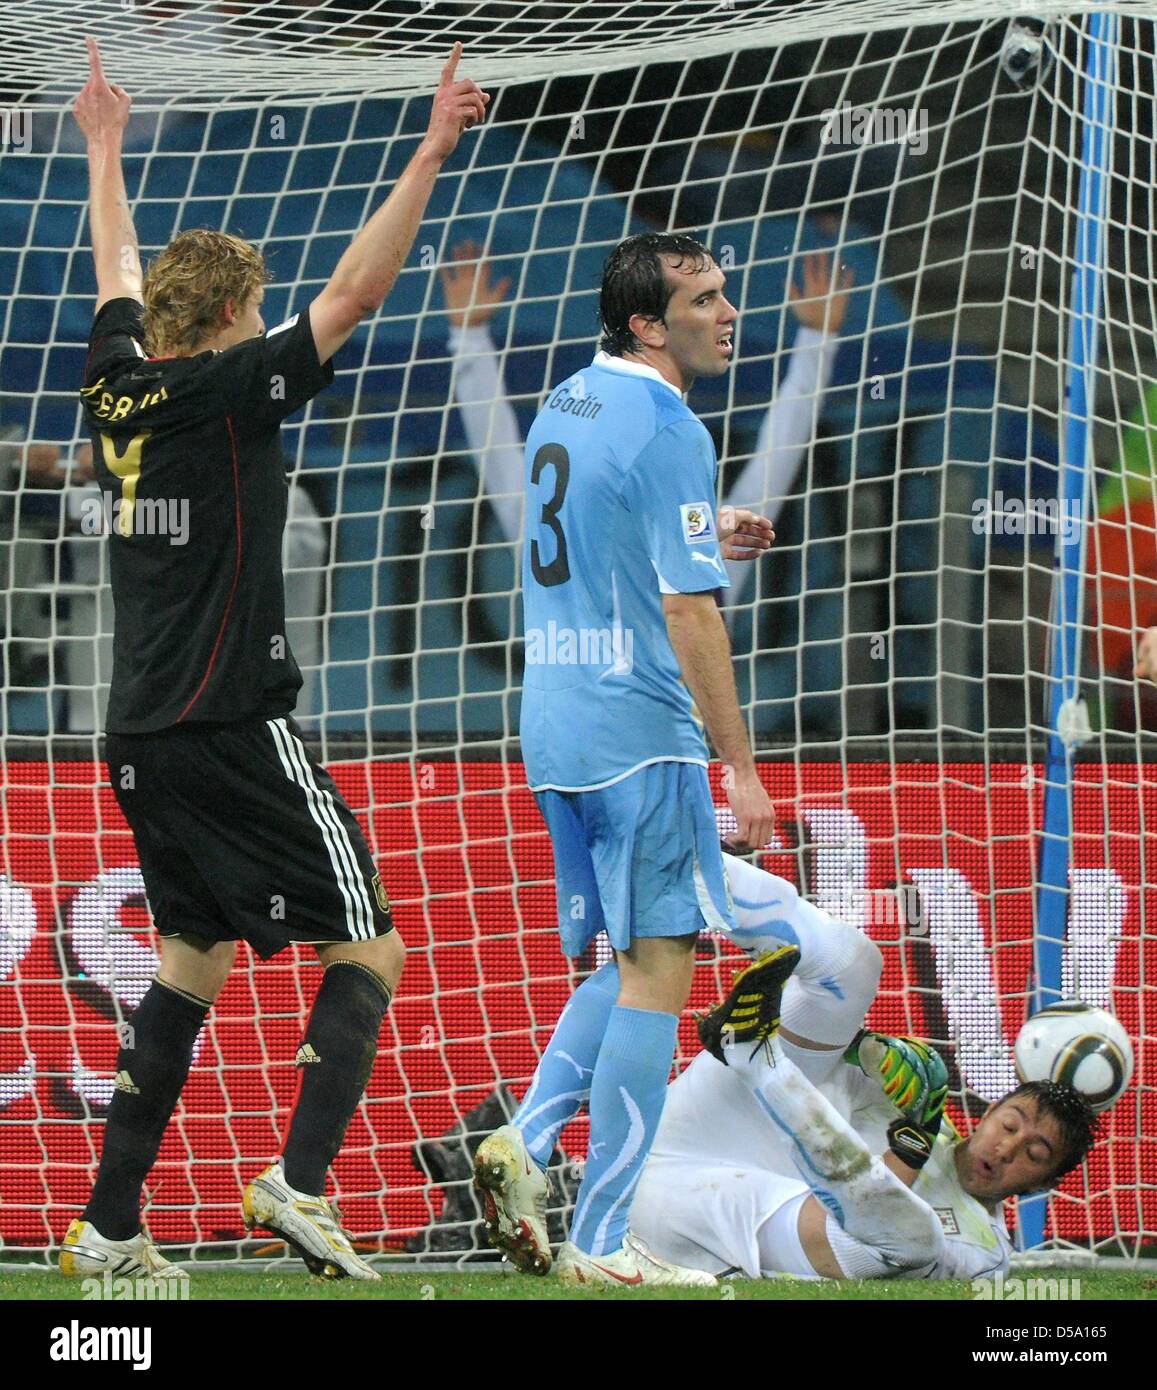 Germany's Stefan Kiessling (L) celebrates after his team mate Sami Khedira (out of picture) scored the 3-2 against Uruguay's goalkeeper Fernando Muslera during the 2010 FIFA World Cup third place match between Uruguay and Germany at the Nelson Mandela Bay Stadium in Port Elizabeth, South Africa 10 July 2010. Photo: Marcus Brandt dpa - Please refer to http://dpaq.de/FIFA-WM2010-TC   Stock Photo